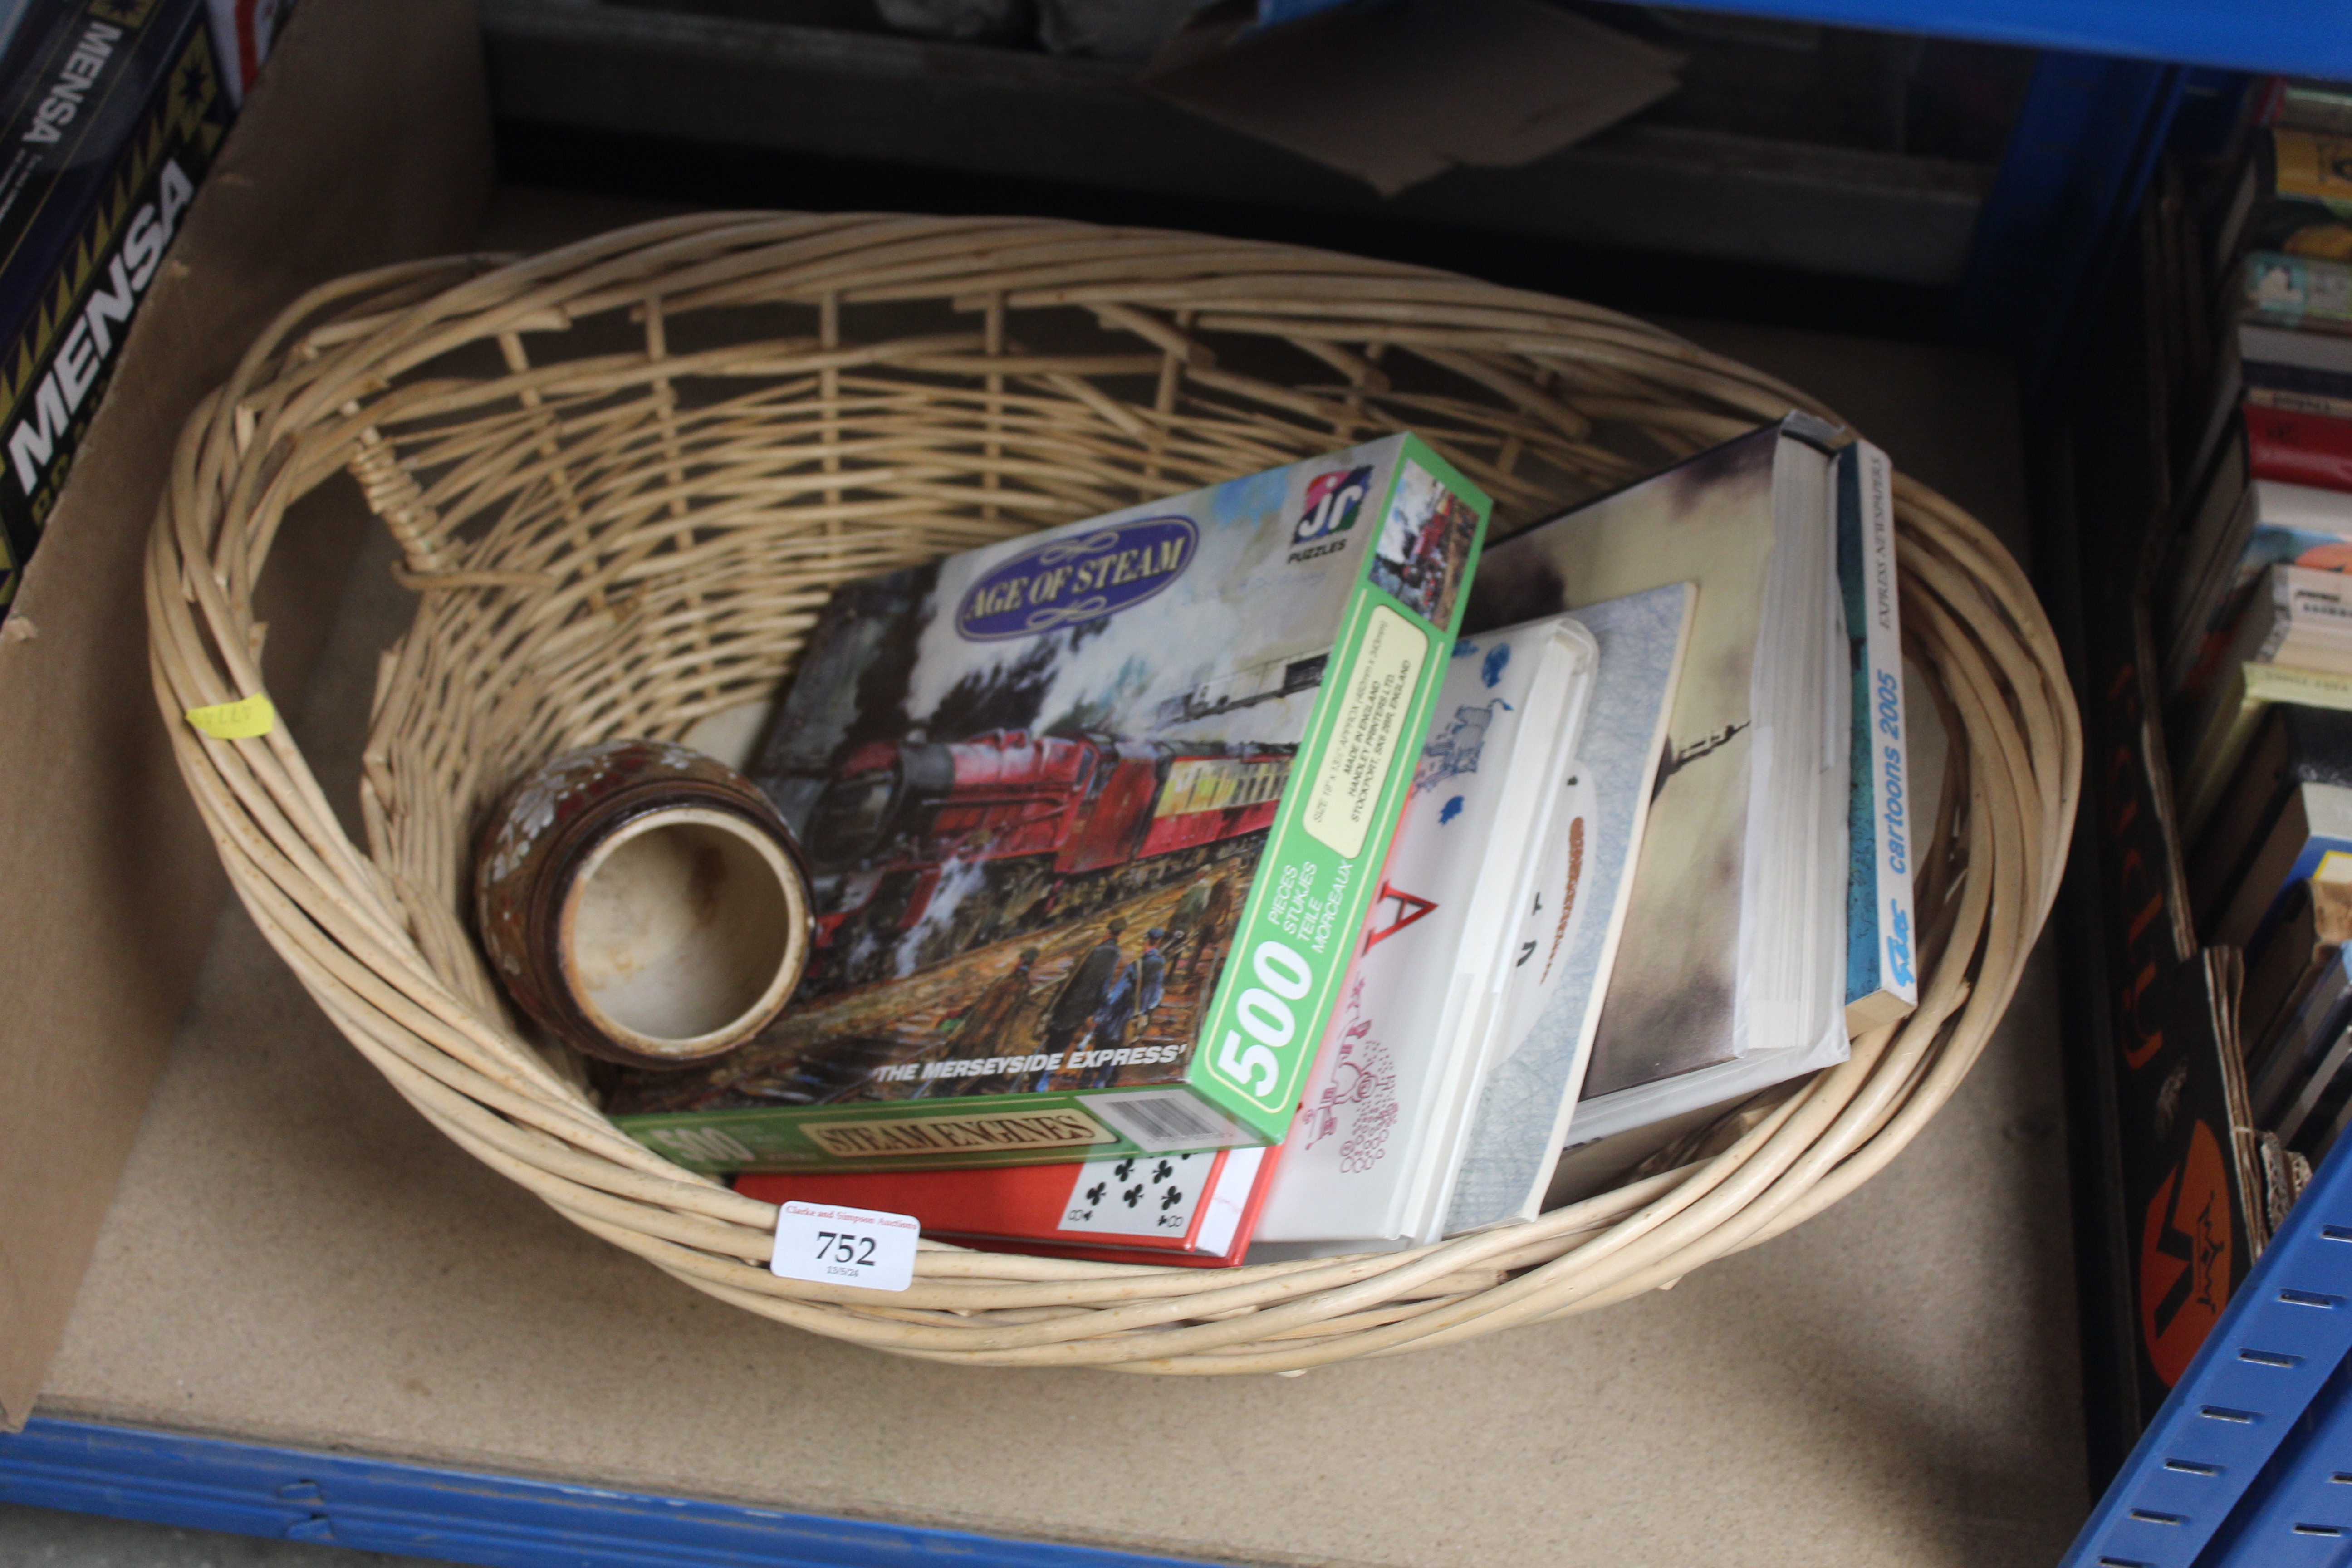 A basket containing books; a puzzle and a Royal Do